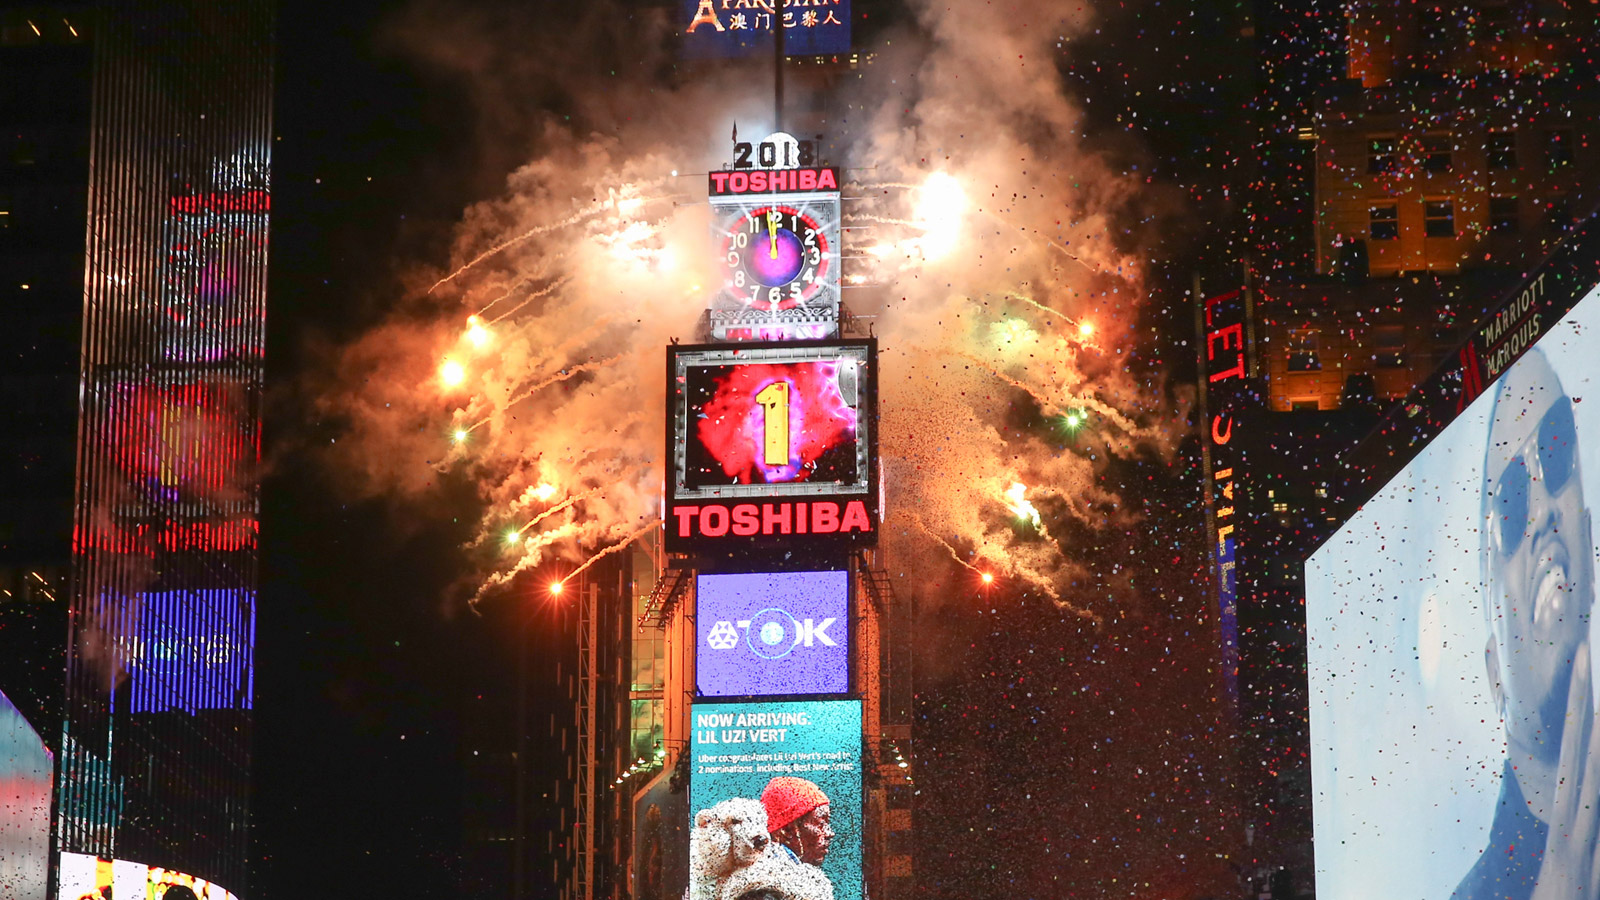 The theme for this year’s Times Square ball drop? Climate change. Grist